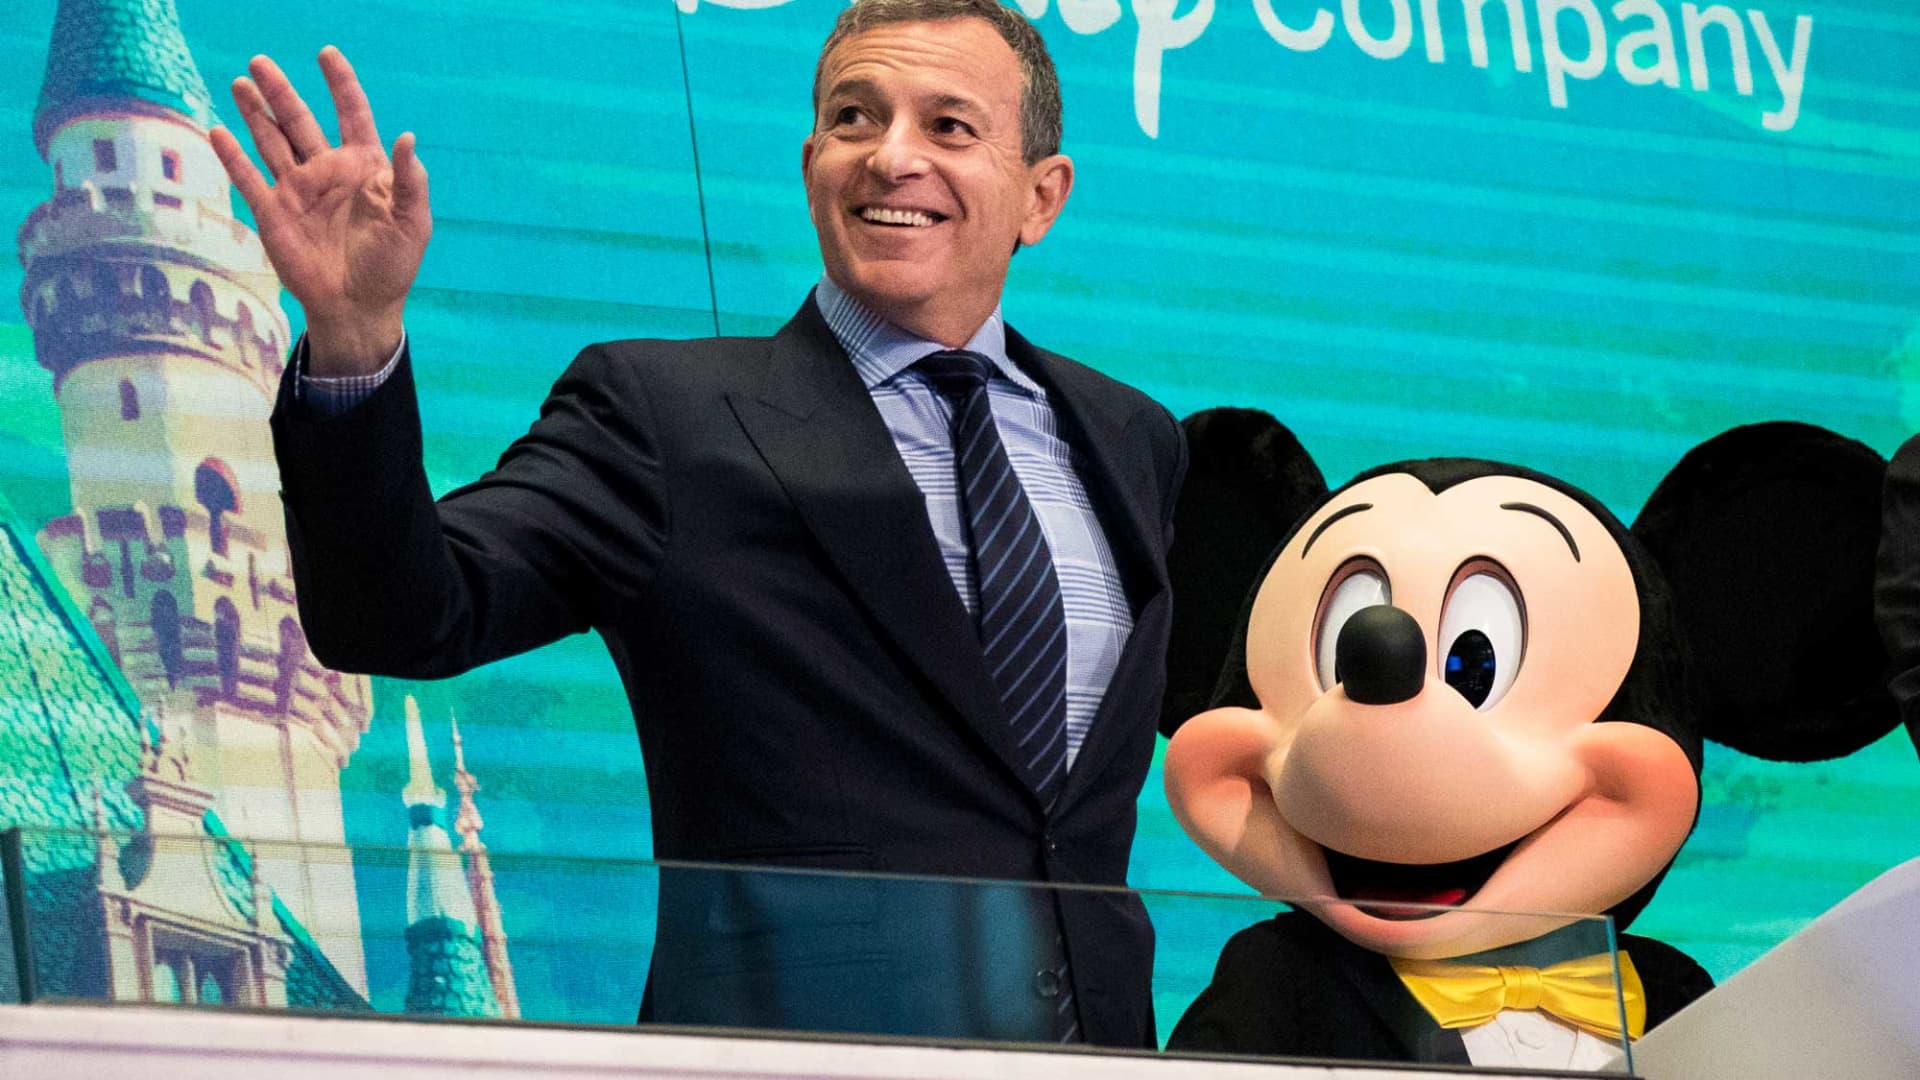 Disney asset sales won't break the bank, but they will move legacy media forward